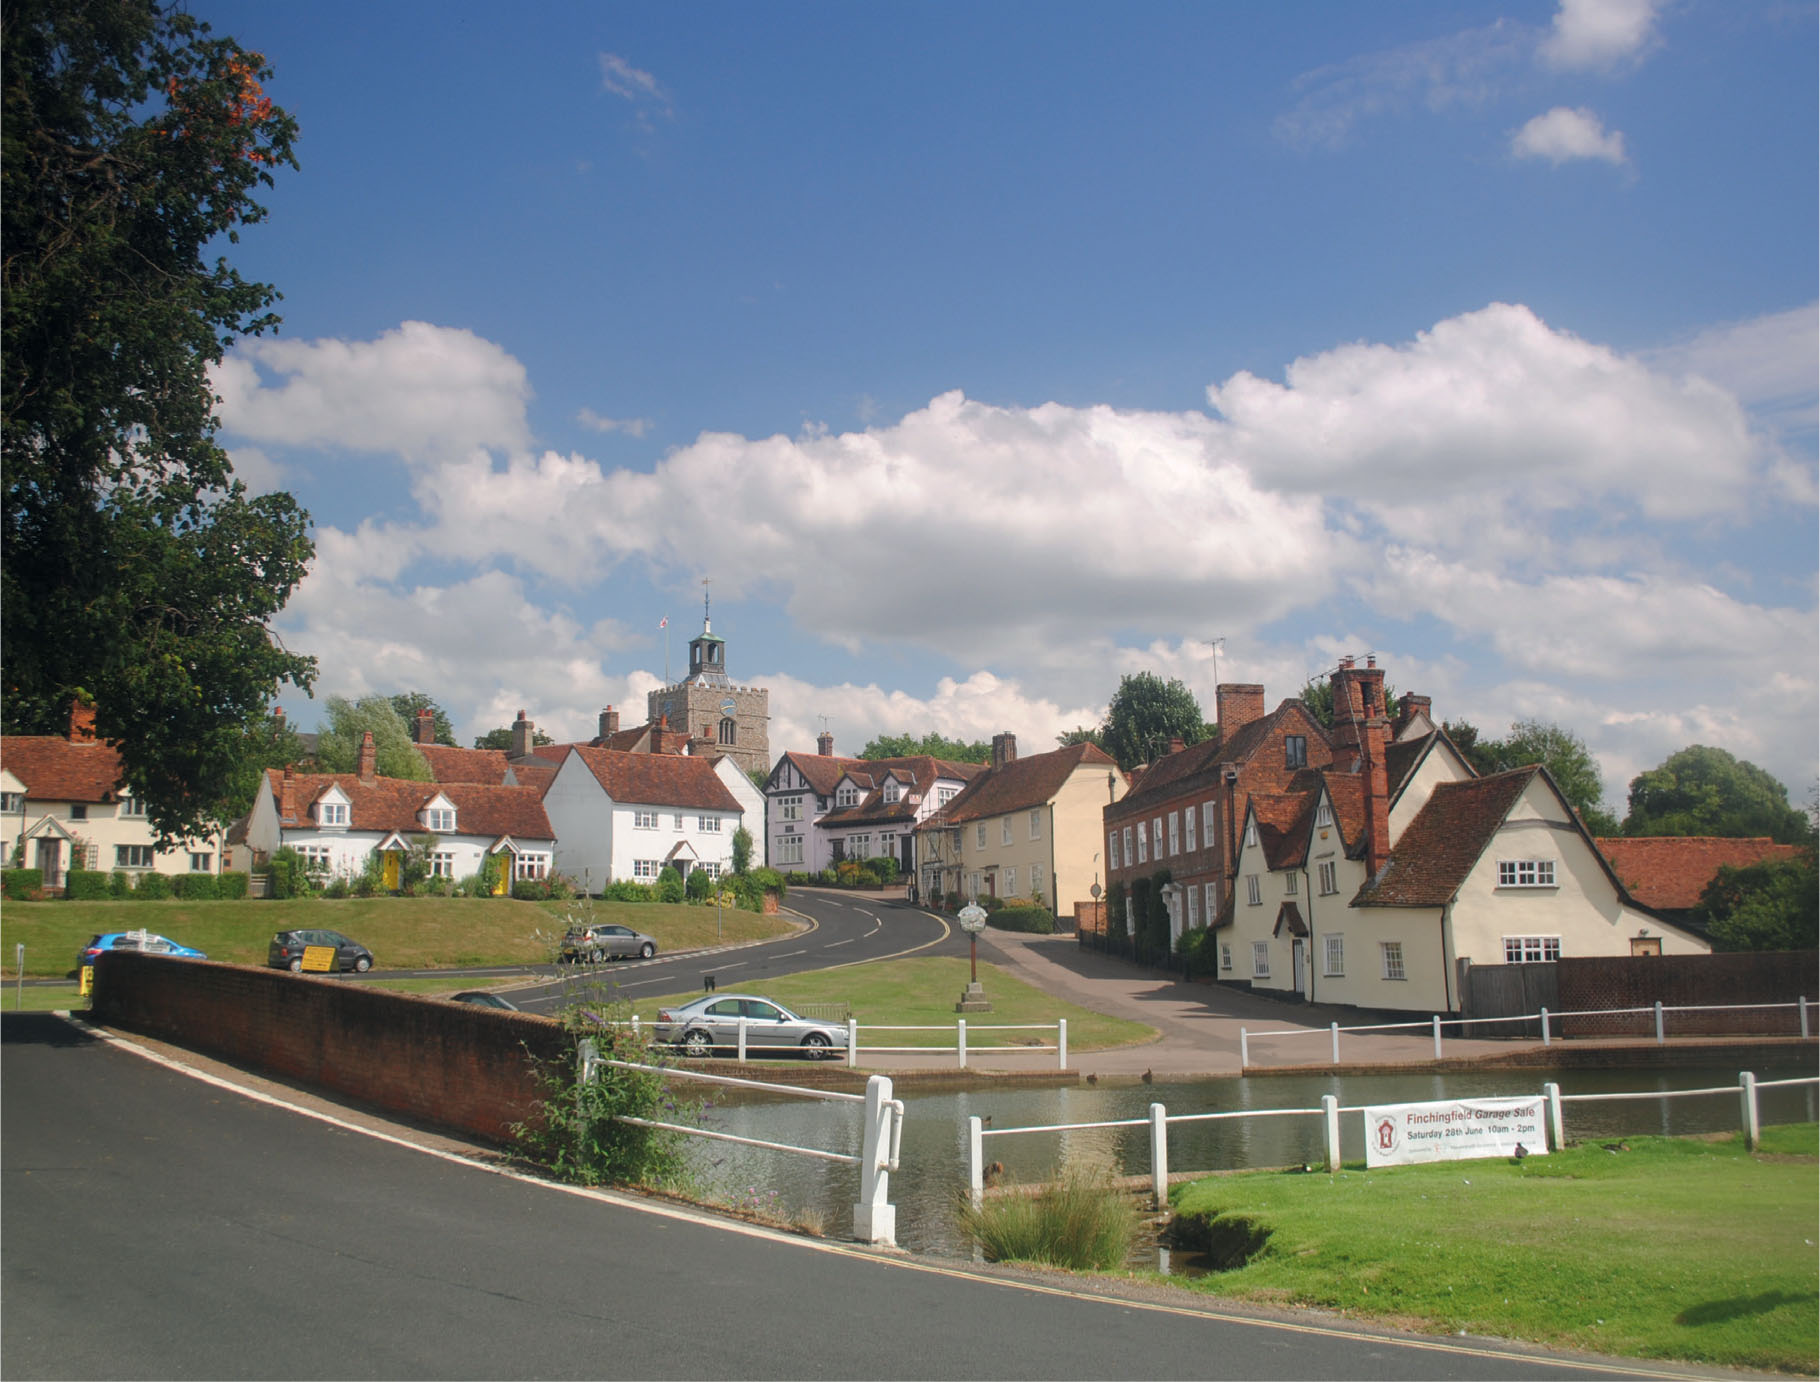 The village green and duck pond at Finchingfield is possibly the best-known - photo 6